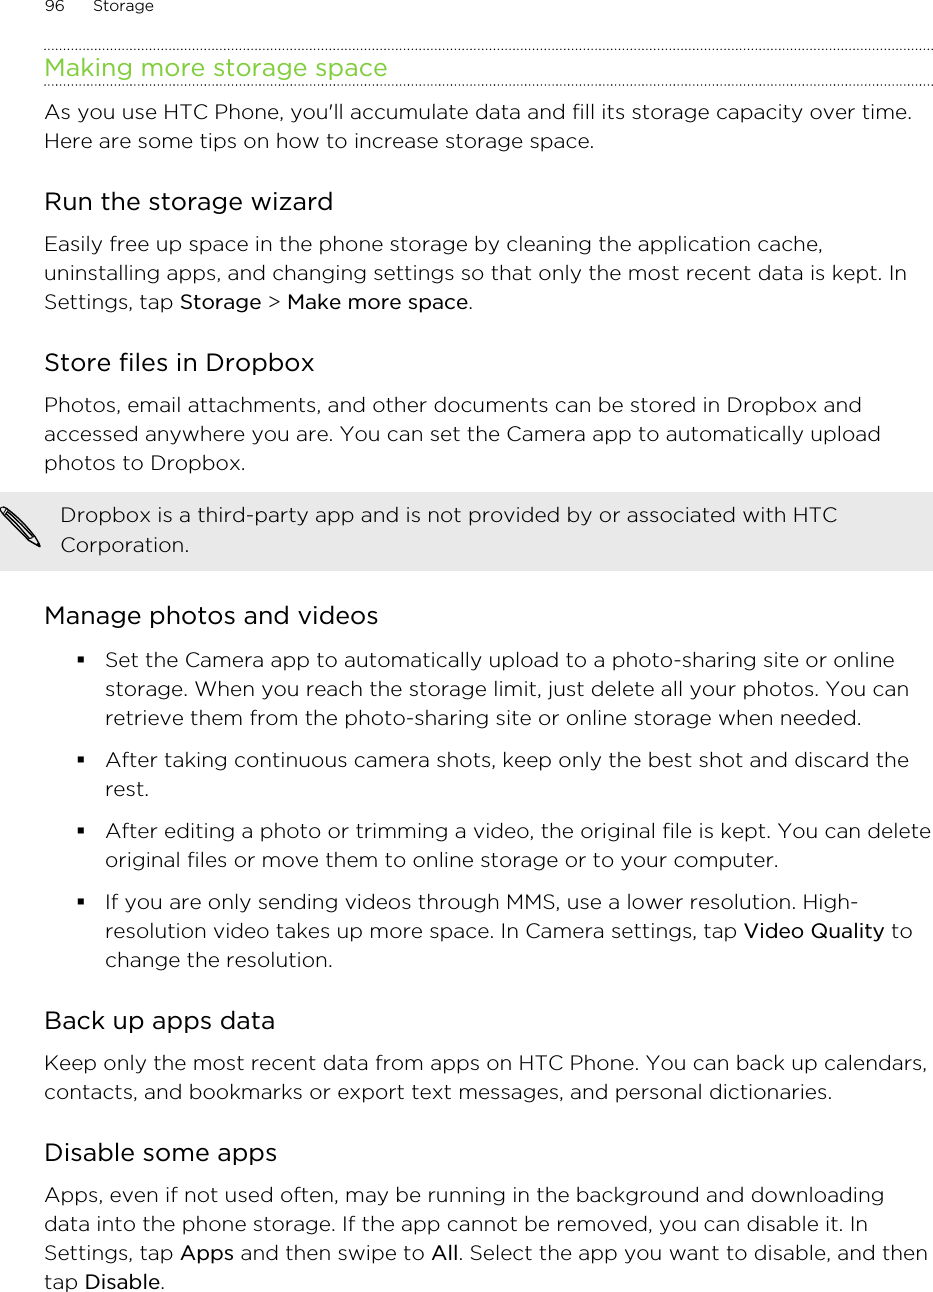 Making more storage spaceAs you use HTC Phone, you&apos;ll accumulate data and fill its storage capacity over time.Here are some tips on how to increase storage space.Run the storage wizardEasily free up space in the phone storage by cleaning the application cache,uninstalling apps, and changing settings so that only the most recent data is kept. InSettings, tap Storage &gt; Make more space.Store files in DropboxPhotos, email attachments, and other documents can be stored in Dropbox andaccessed anywhere you are. You can set the Camera app to automatically uploadphotos to Dropbox.Dropbox is a third-party app and is not provided by or associated with HTCCorporation.Manage photos and videos§Set the Camera app to automatically upload to a photo-sharing site or onlinestorage. When you reach the storage limit, just delete all your photos. You canretrieve them from the photo-sharing site or online storage when needed.§After taking continuous camera shots, keep only the best shot and discard therest.§After editing a photo or trimming a video, the original file is kept. You can deleteoriginal files or move them to online storage or to your computer.§If you are only sending videos through MMS, use a lower resolution. High-resolution video takes up more space. In Camera settings, tap Video Quality tochange the resolution.Back up apps dataKeep only the most recent data from apps on HTC Phone. You can back up calendars,contacts, and bookmarks or export text messages, and personal dictionaries.Disable some appsApps, even if not used often, may be running in the background and downloadingdata into the phone storage. If the app cannot be removed, you can disable it. InSettings, tap Apps and then swipe to All. Select the app you want to disable, and thentap Disable.96 StorageHTC Confidential for Certification HTC Confidential for Certification 